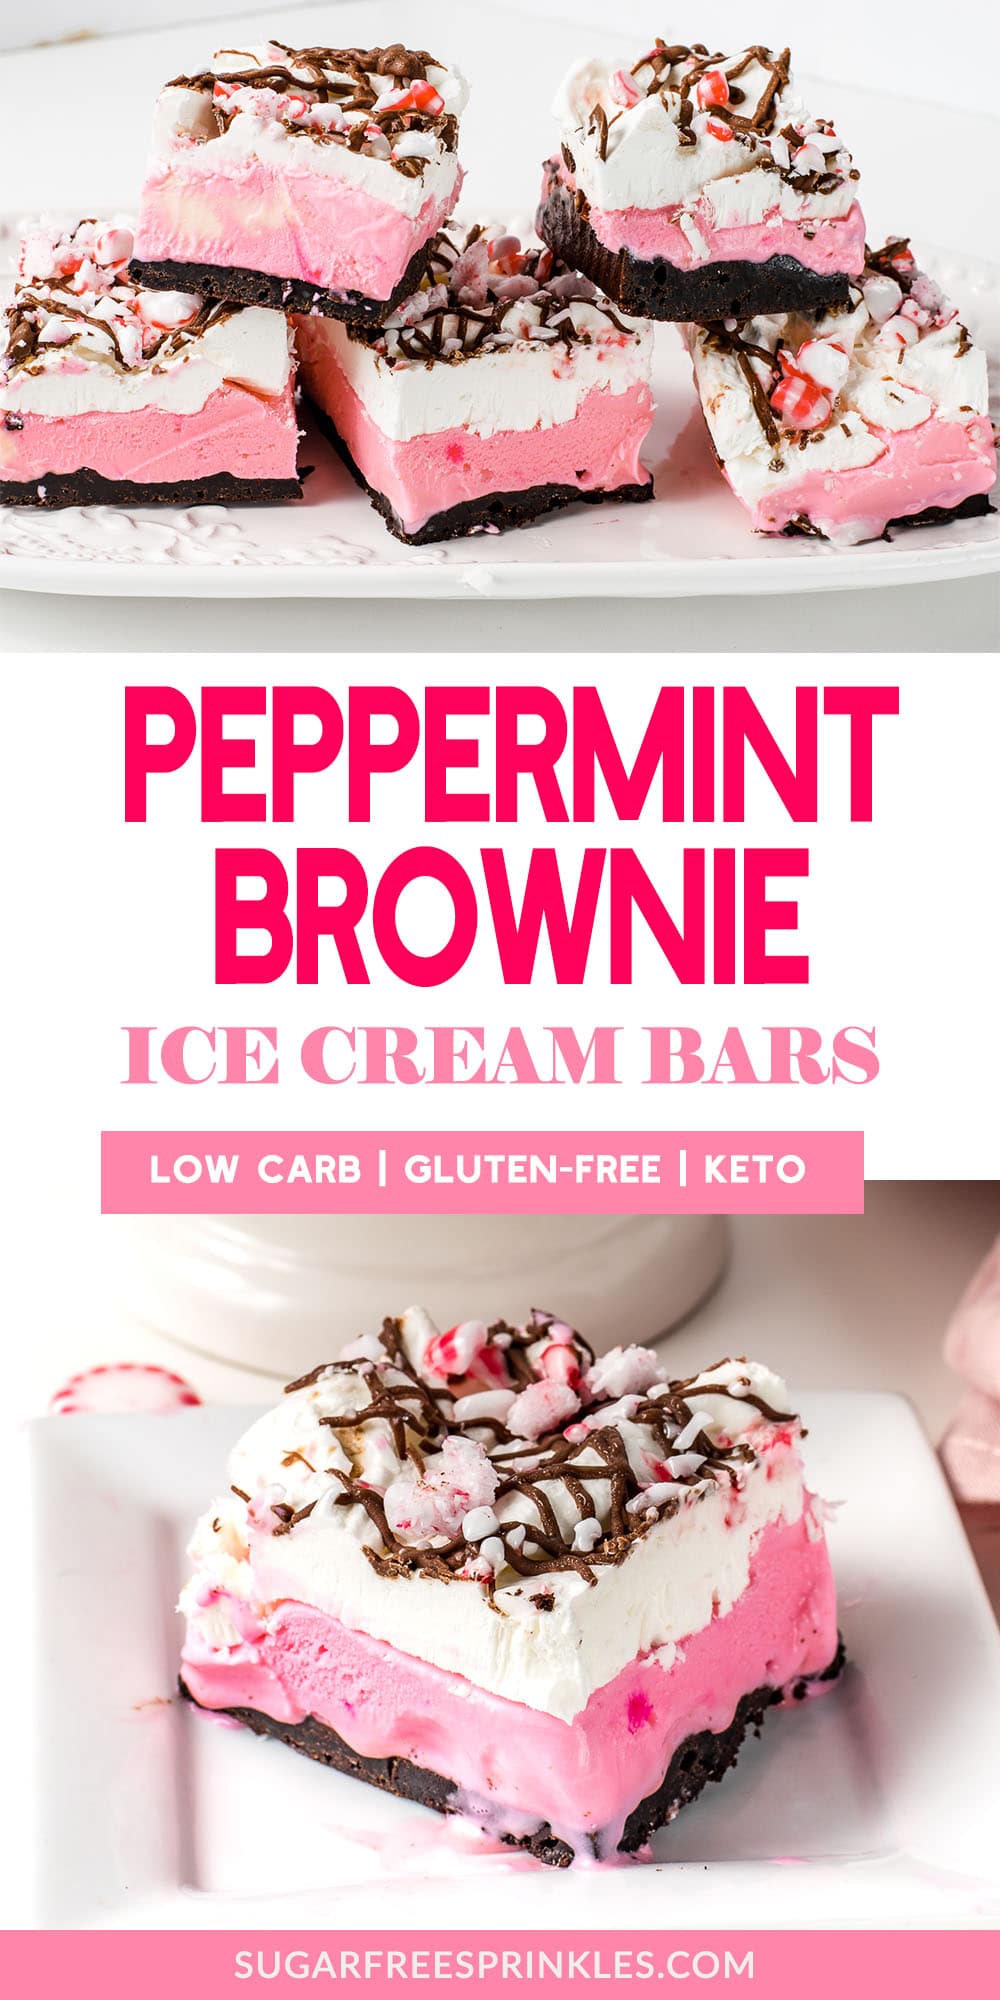 A Pinterest banner showing low carb peppermint ice cream bars on a plate.